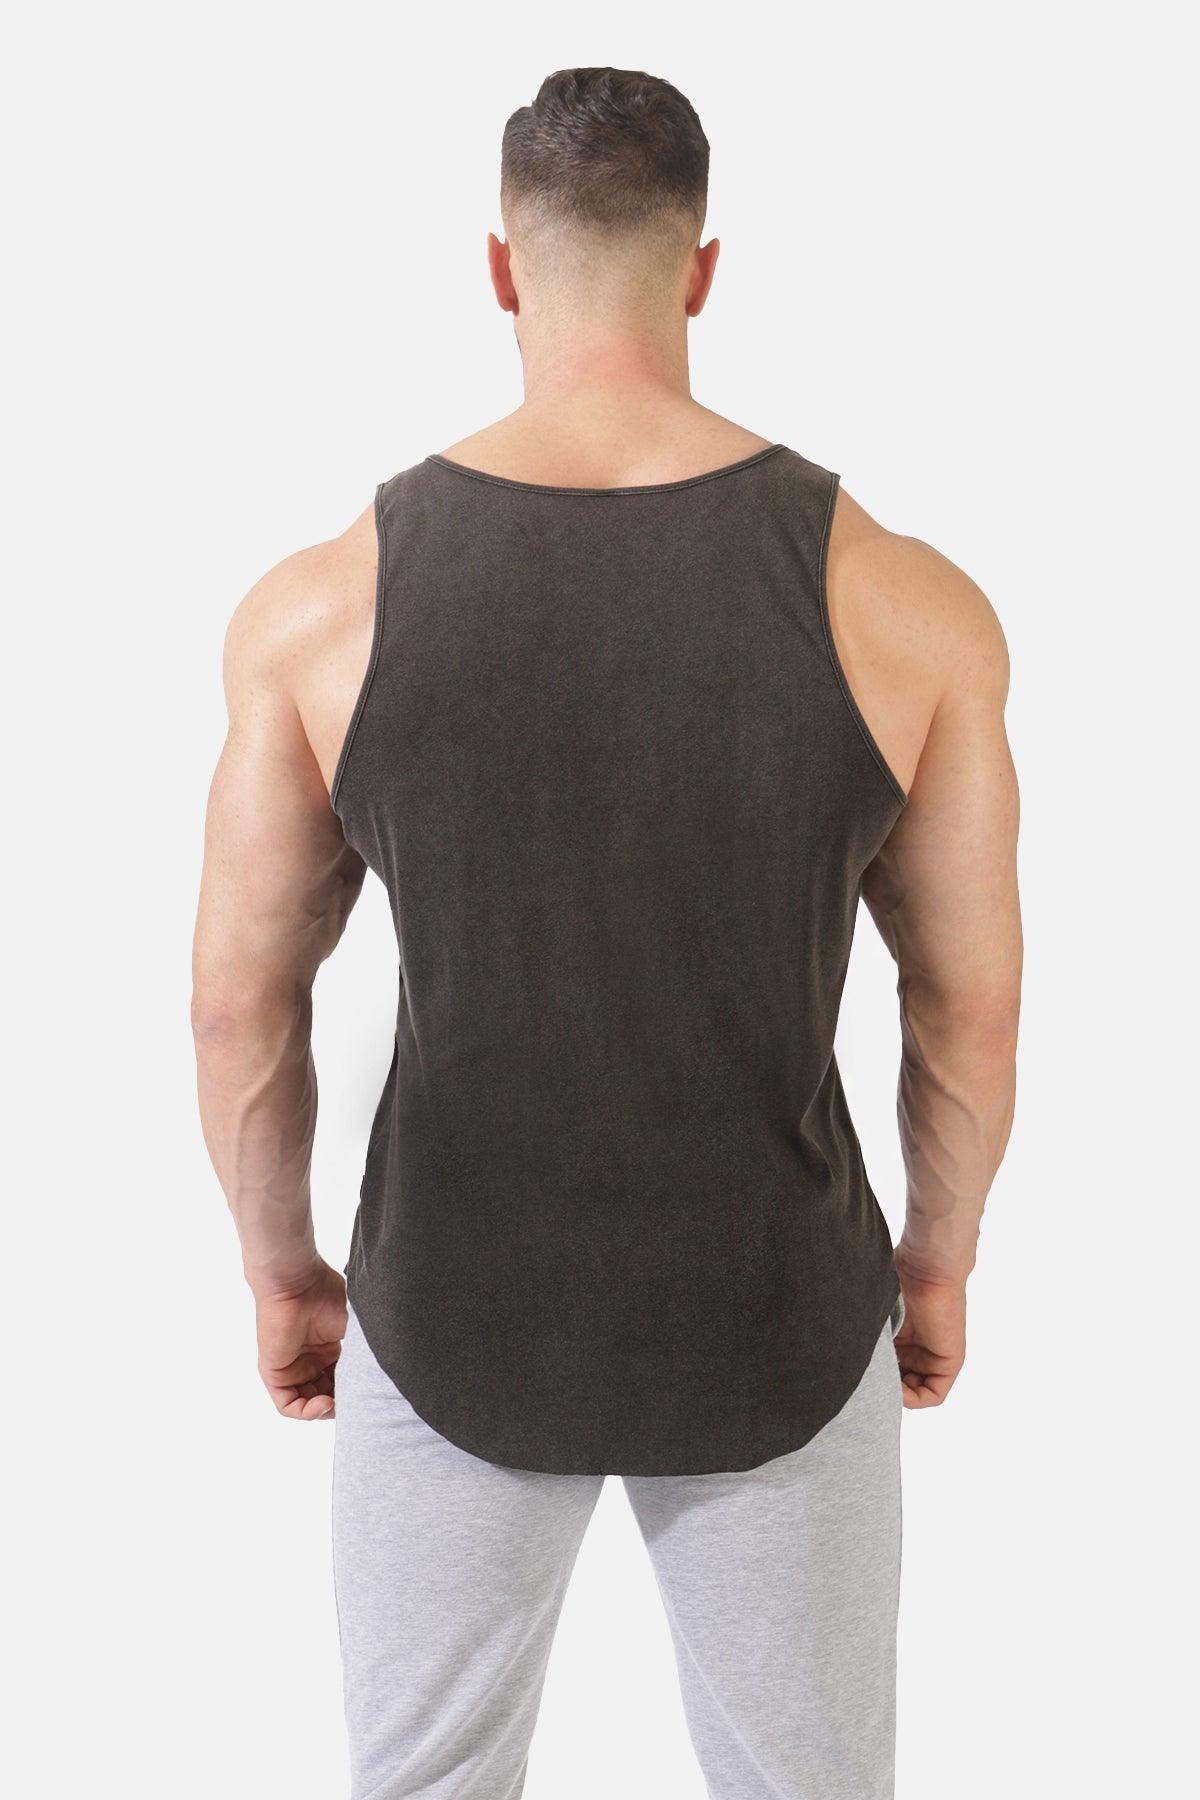 Heavy Duty Workout Tank Top - Washed Black - Jed North